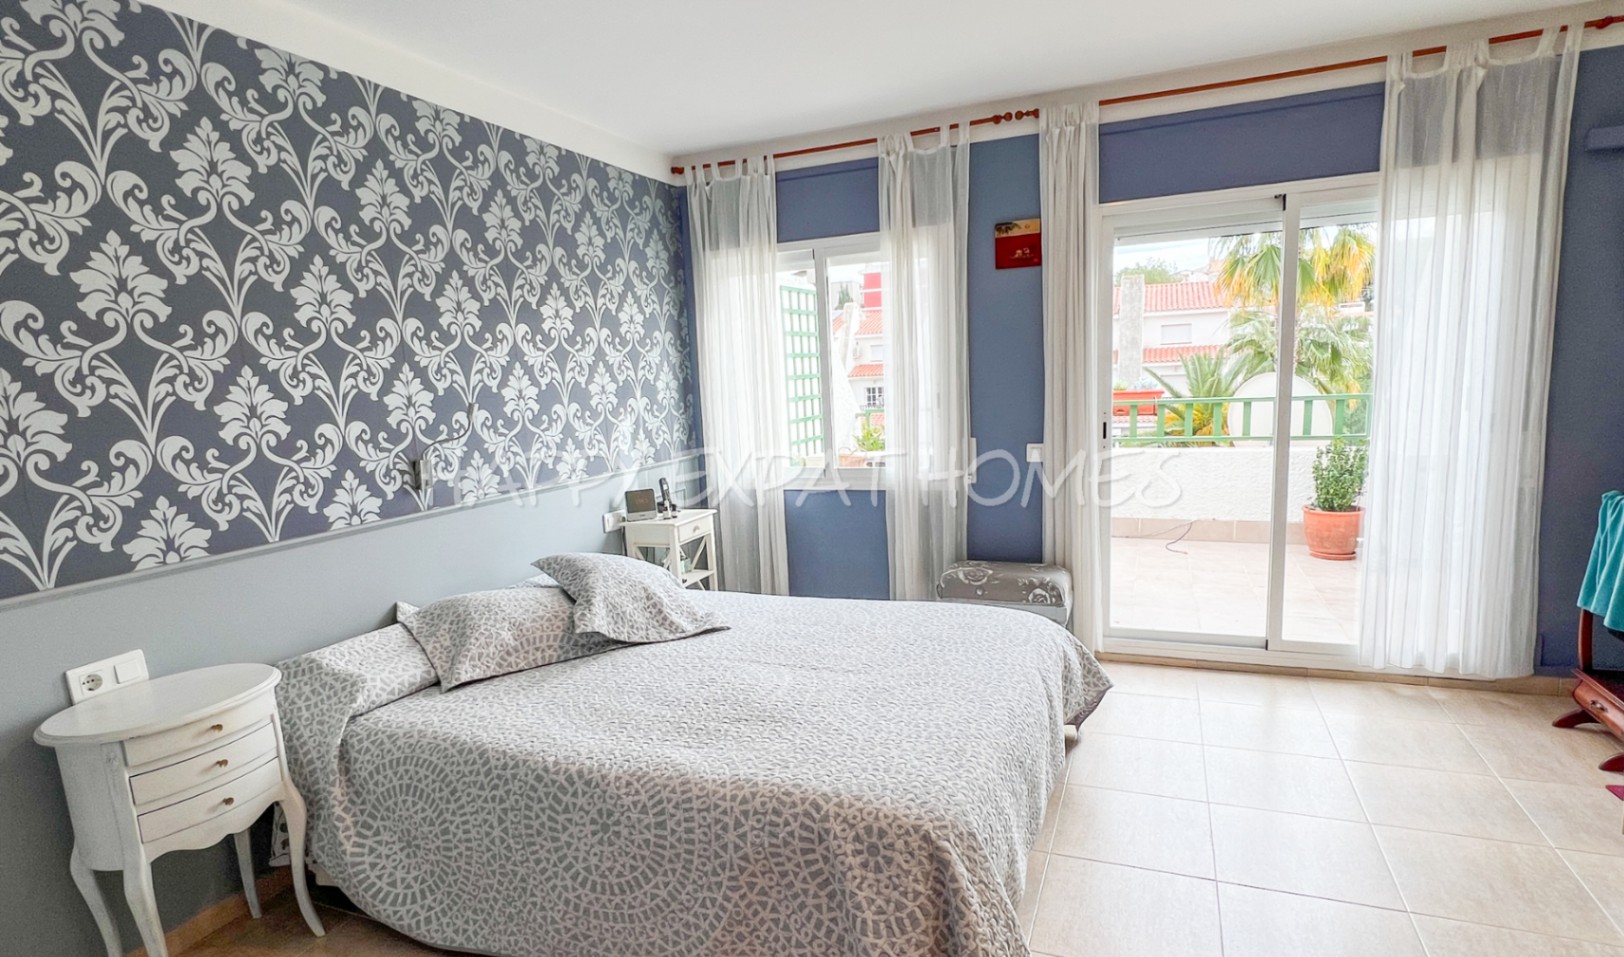 Lovely townhouse in Vallpineda with community pool